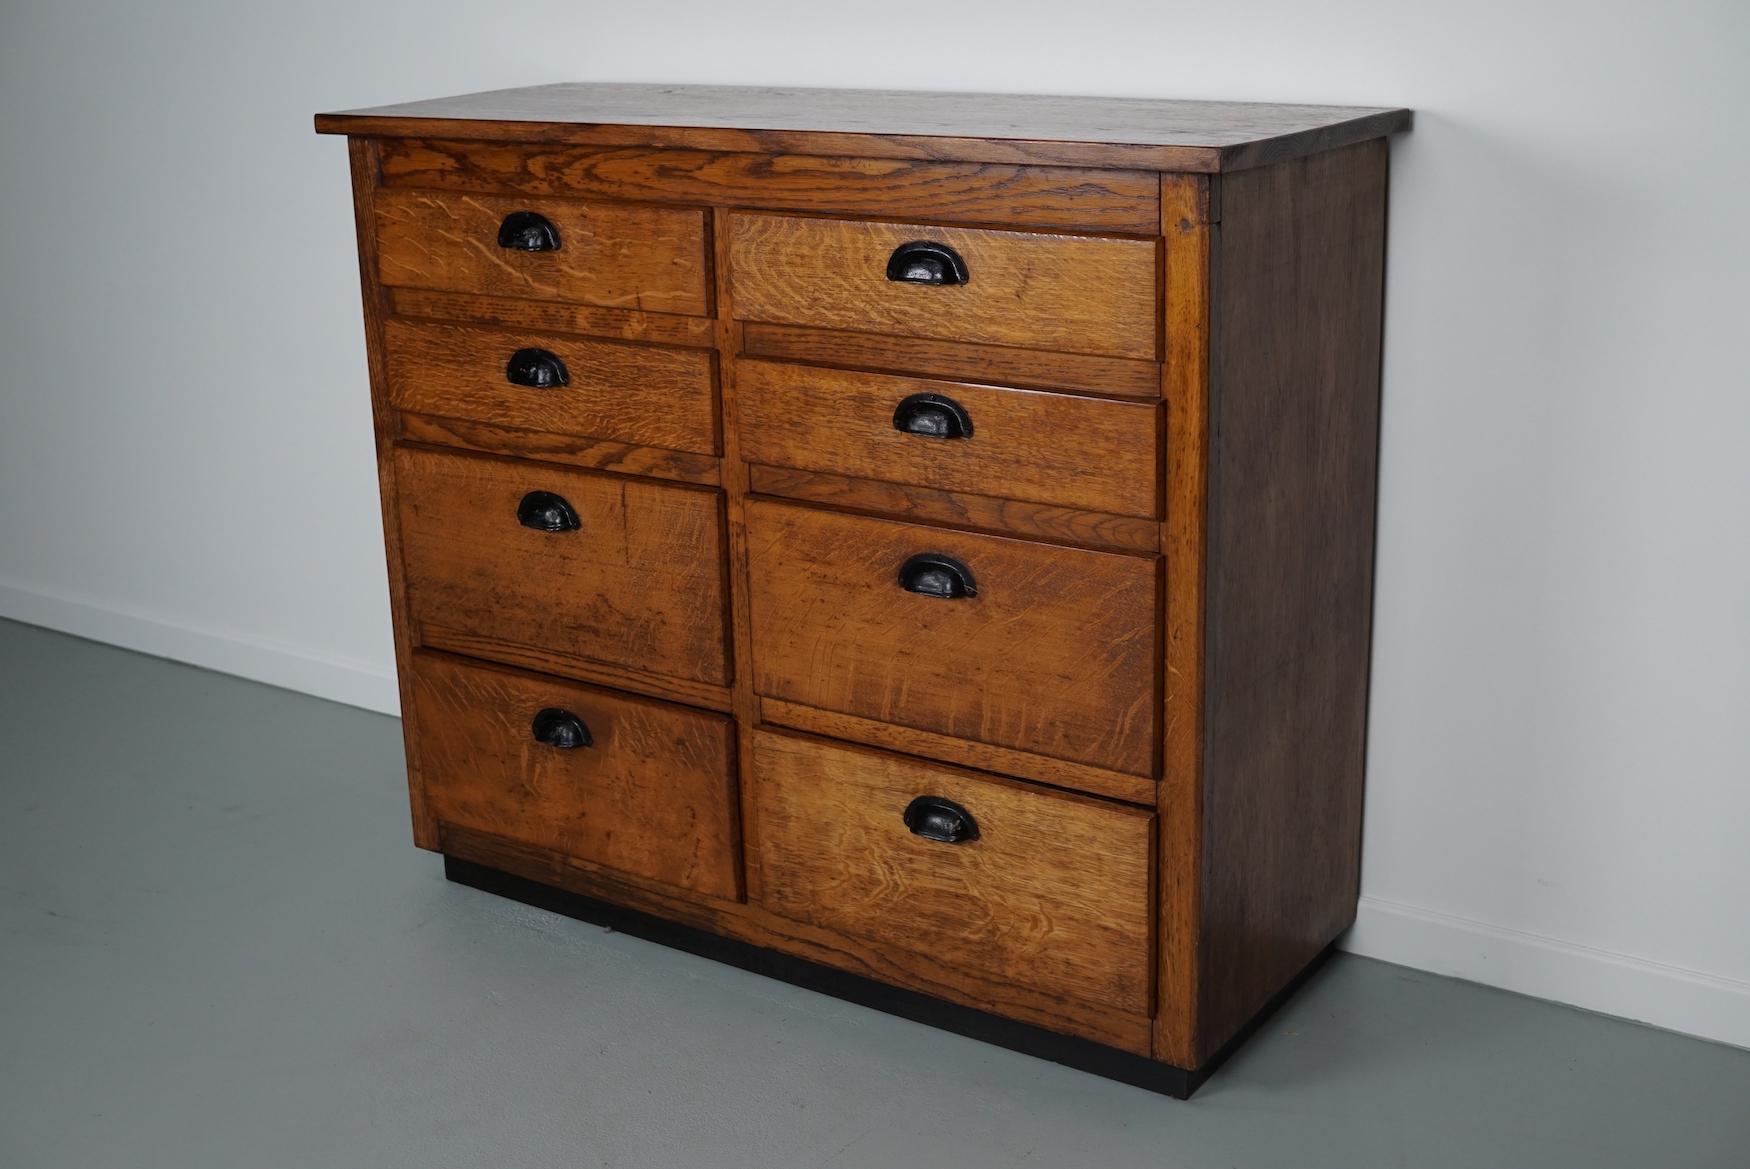 This apothecary cabinet was made circa 1940s in Belgium and was used in a hardware store in Belgium until recently. It features many drawers in 2 different sizes with black metal handles. The interior dimensions of the drawers are: D 35 x W 45 x H 9